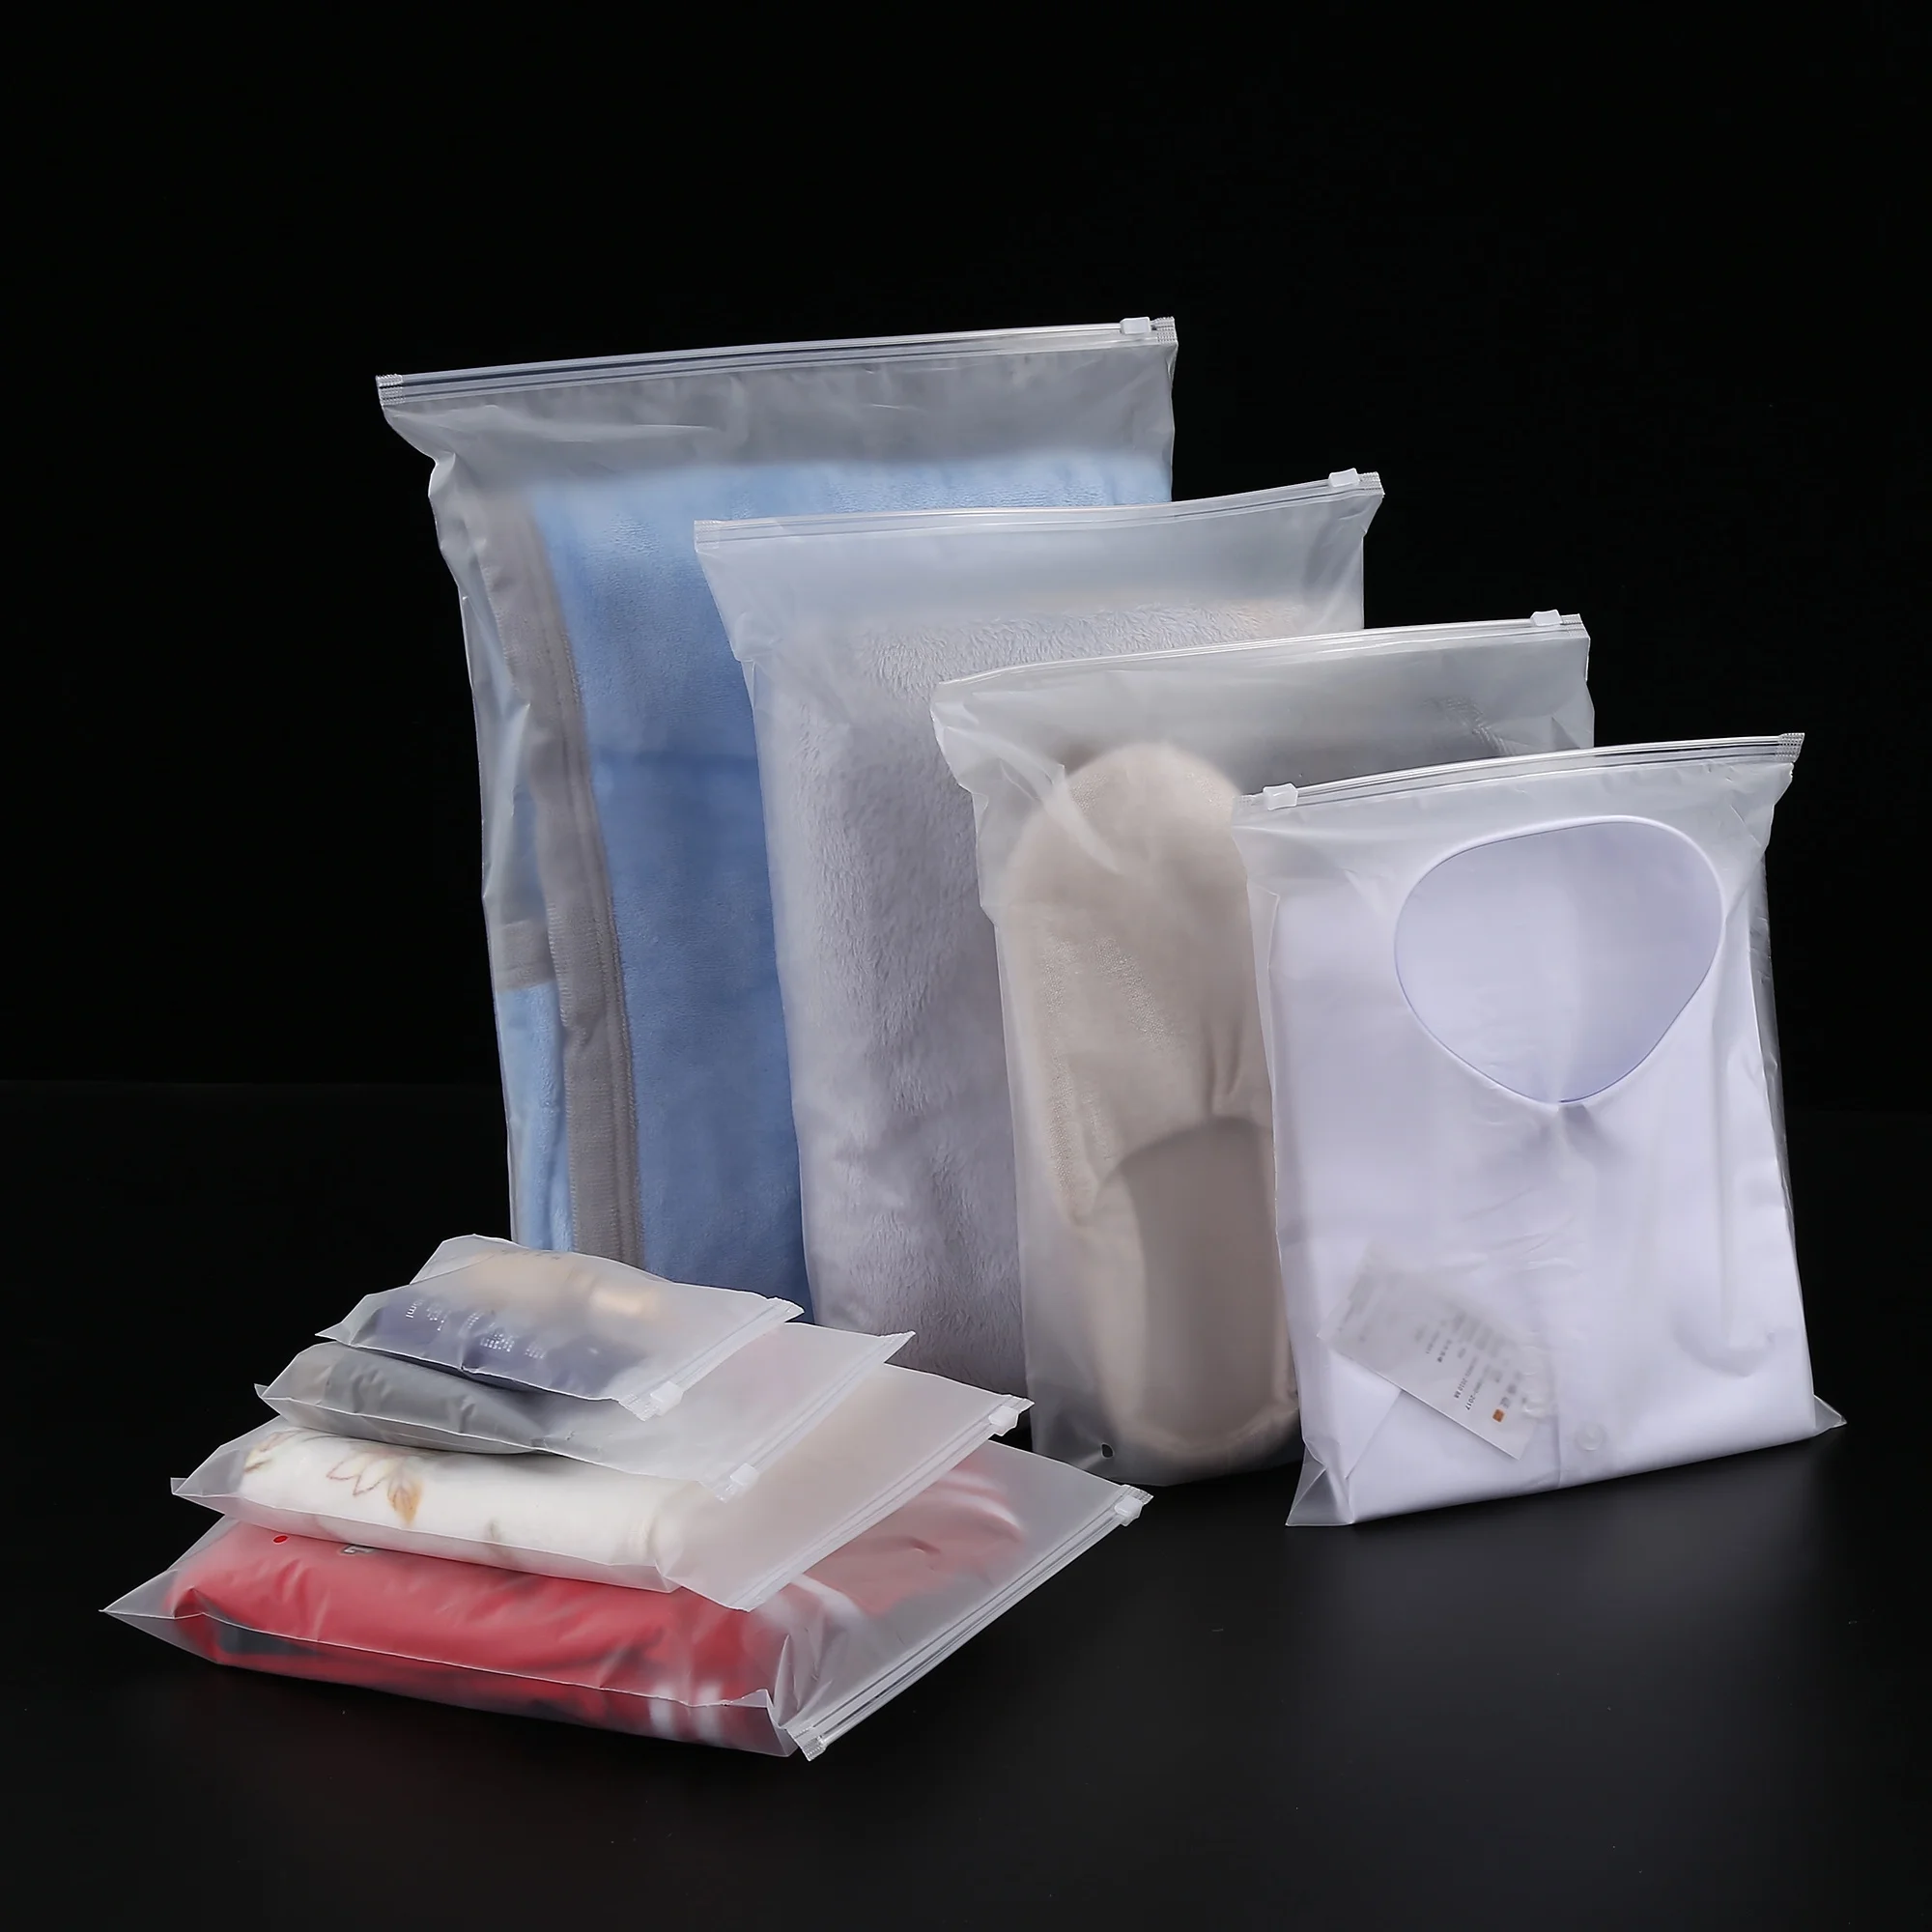 

20*25cm Travel Storage Ziplock Bags Frosted Resealable Zip Clothing Plastic Bags Plastic Reclosable Zipper Bags Ready to Ship